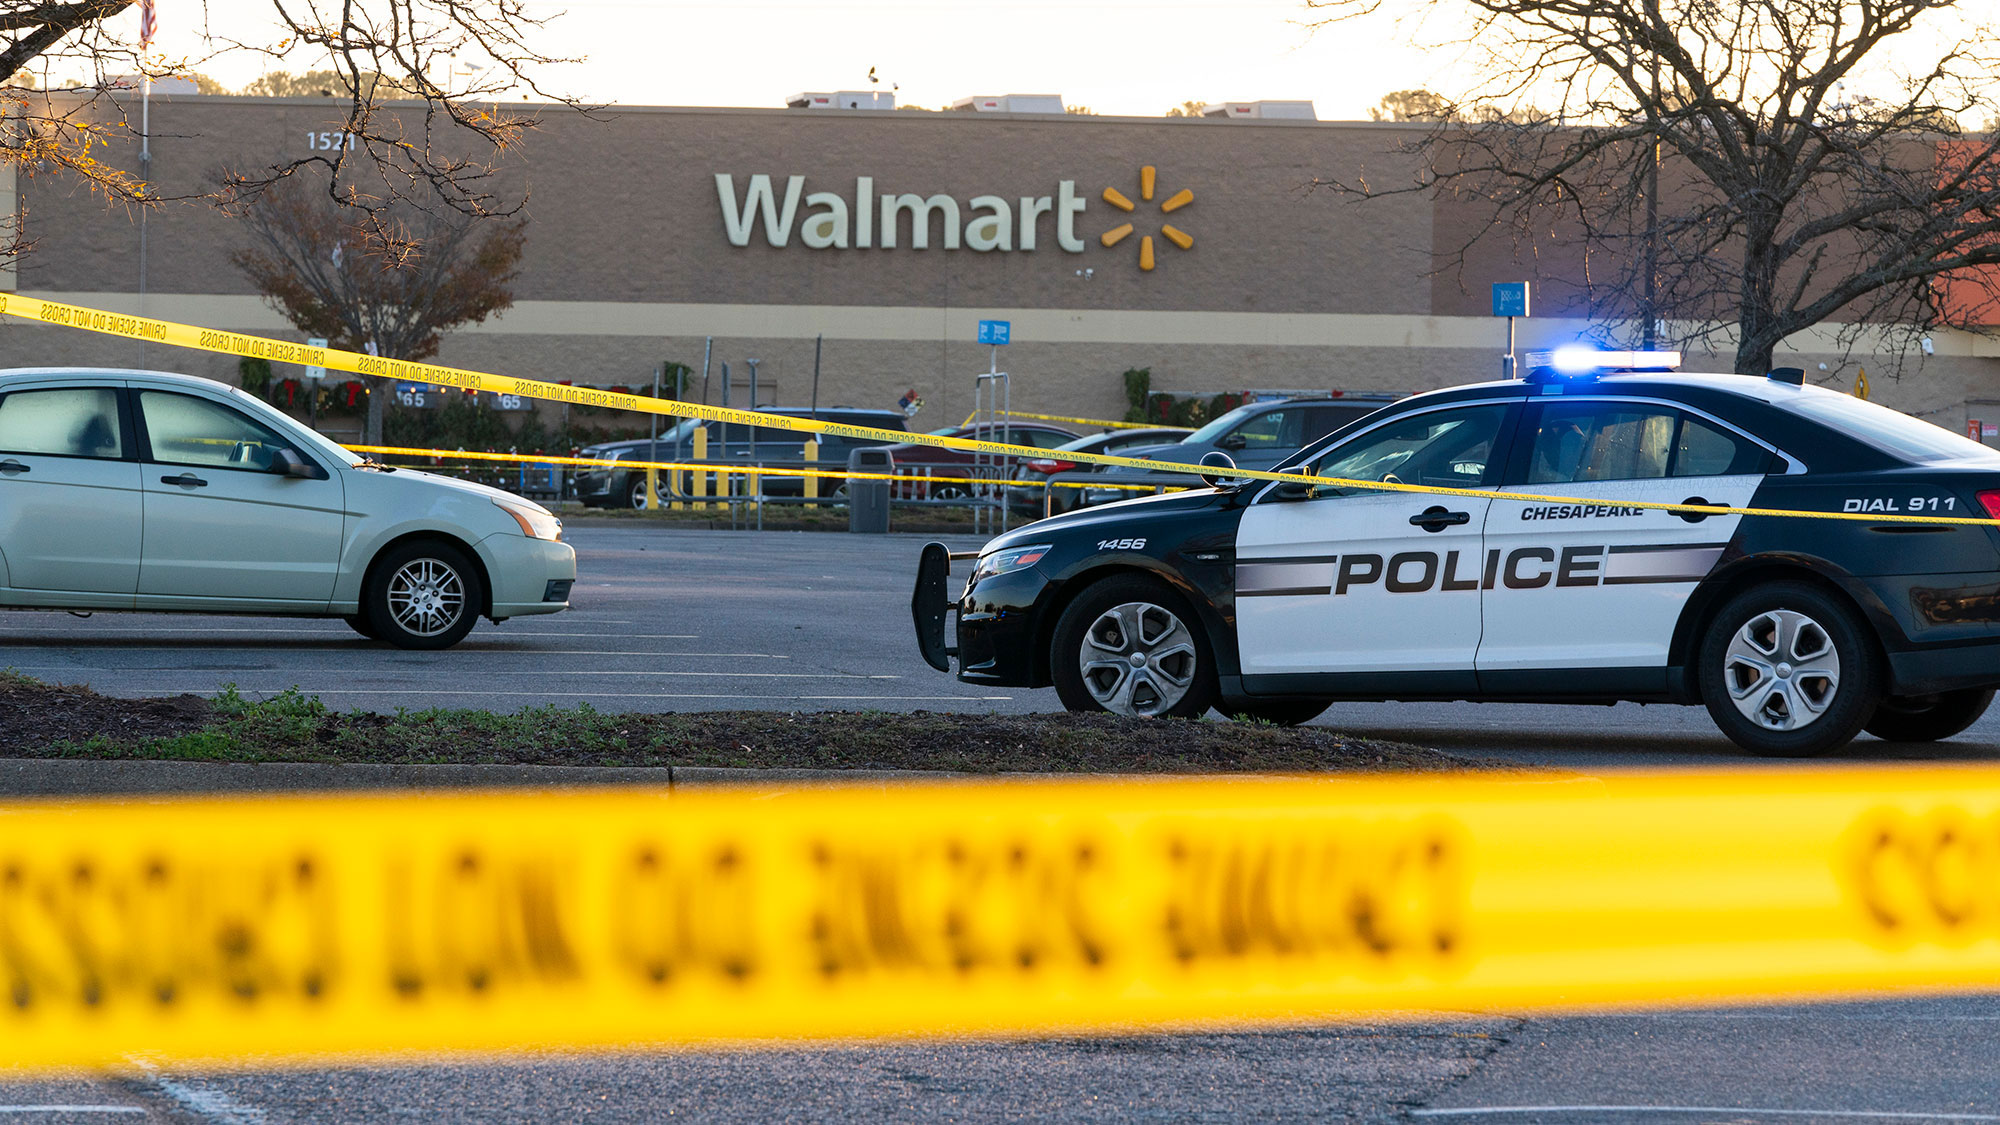 Law enforcement work the scene of a shooting at a Walmart in Chesapeake, Virginia, on November 23. 